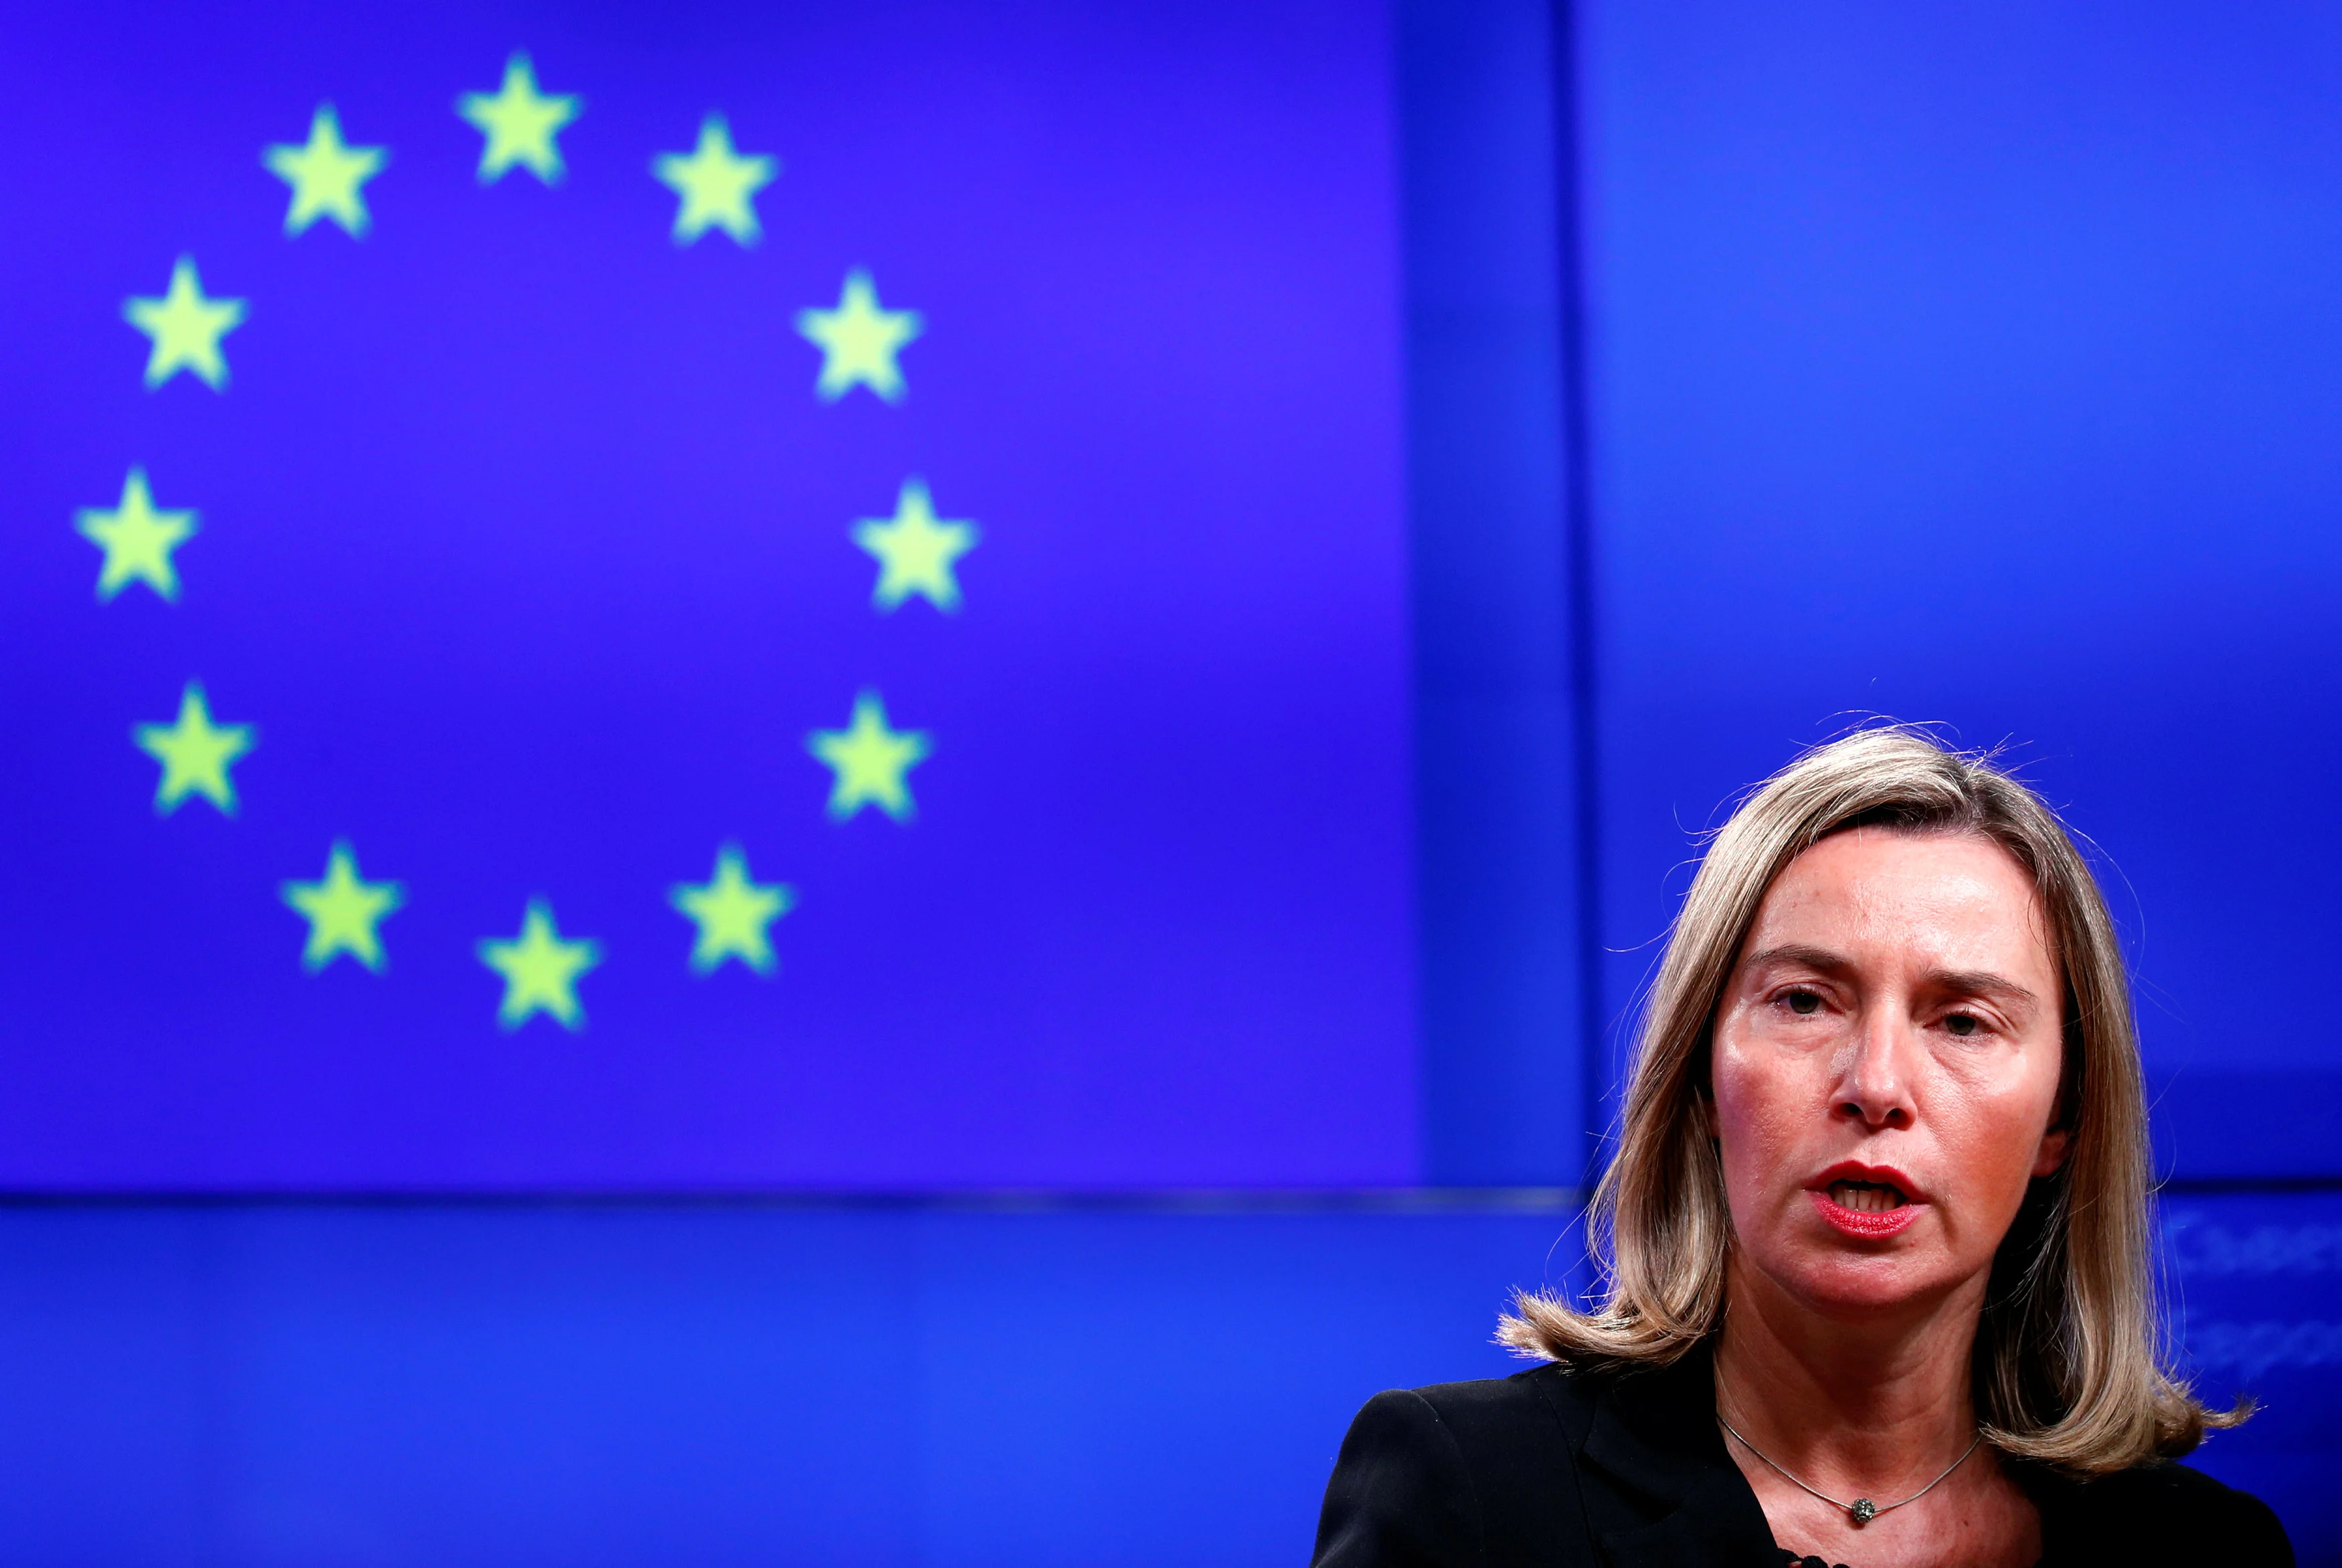 European Union foreign policy chief Federica Mogherini takes part in a news conference atfer a Turkey-EU Association Council in Brussels, Belgium, March 15, 2019.  REUTERS/Francois Lenoir